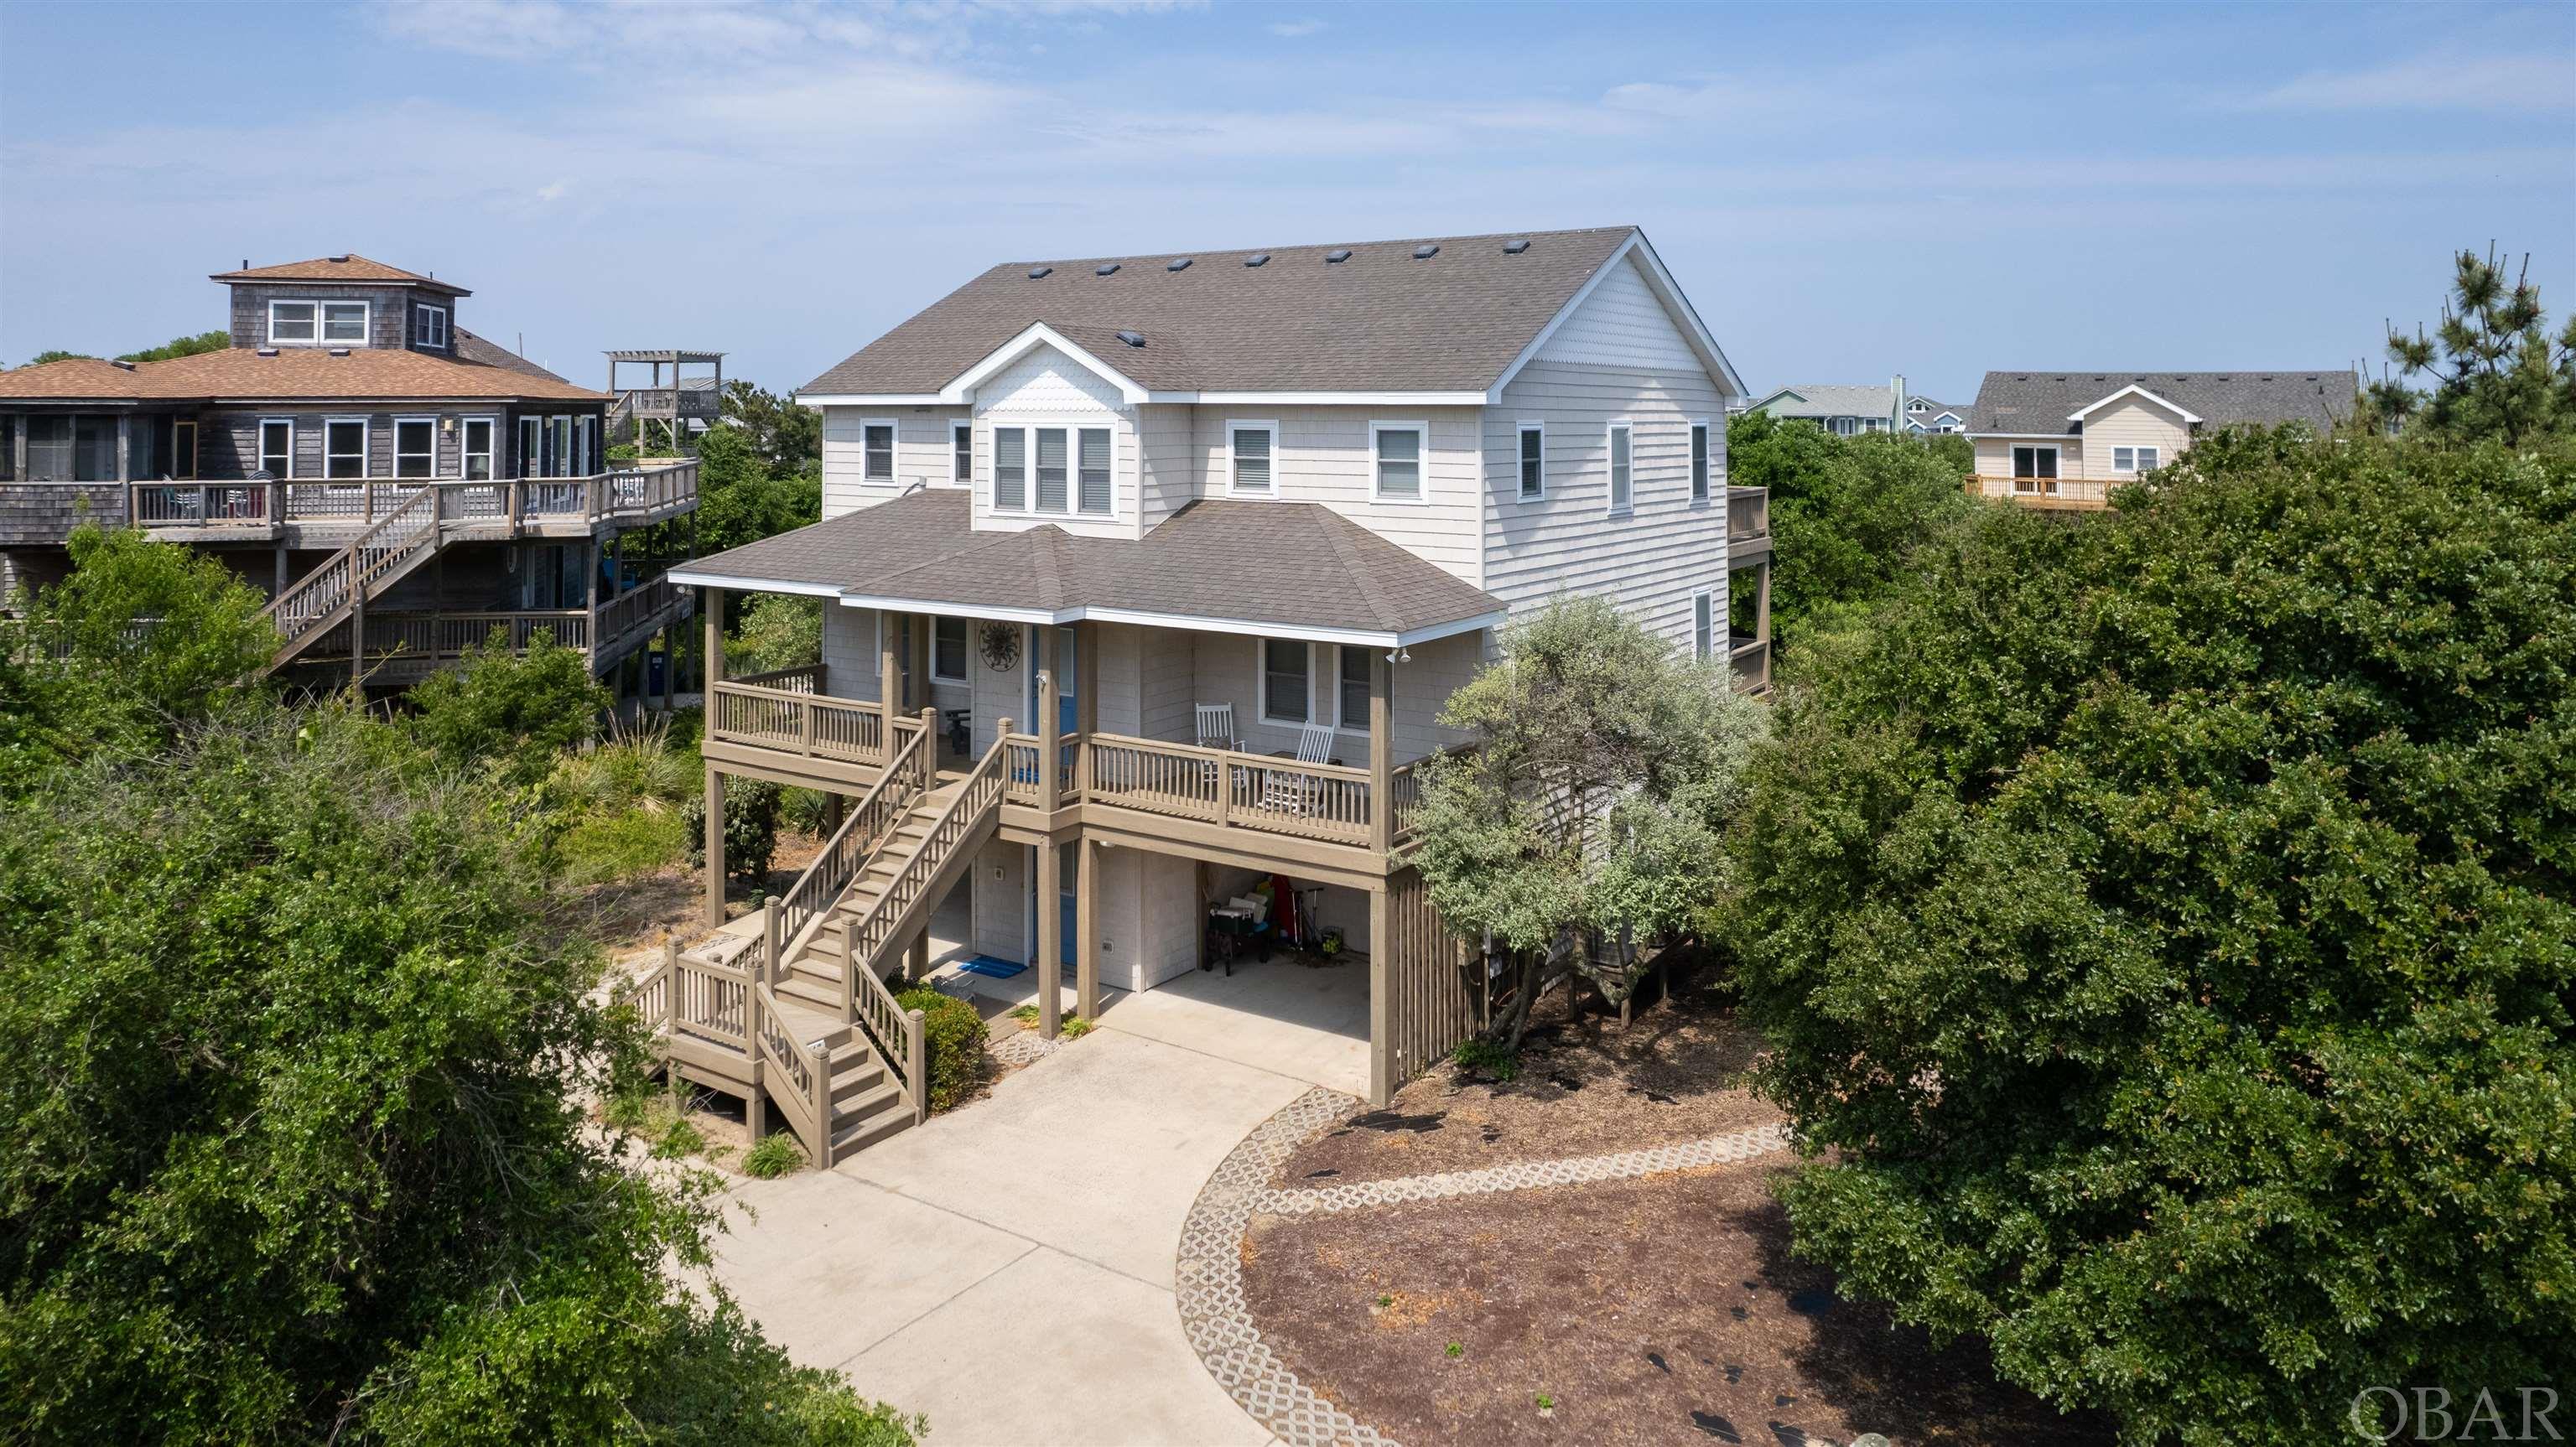 This beautiful property is located close to the beach, has community amenities, and has a quiet, no-traffic cul-de-sac.  Tucked away in the small, desirable community of Port Trinitie, the covered front porch welcomes you into this gorgeous and updated home with an elevator, private pool, hot tub, and large ground-level game and bonus family room.  The floor plan was well thought out and flows perfectly.  A stunning new kitchen with custom cabinetry, artistic backsplash, and quartz countertops opens into the great room.  The top level has tons of natural light and high ceilings.  The biggest ensuite on the top level has a new bathroom with a tile shower, custom vanity, and private laundry, so you don't have to walk downstairs to the larger ground-level laundry room.   The outstanding decor lends itself to the beachy feeling with pleasant bright colors and comfortable accents.  Three of the bathrooms have been completely redone.  The ground level has a large game room and sitting area, a kitchenette, a second refrigerator, and a microwave.  The ground-level ensuite is entirely handicap accessible, complete with a roll-in shower.  Also on the ground level is owner storage and a large laundry room.  Four ensuites are on the mid-level; the larger two have access to the covered deck that overlooks the pool area and beautiful, new bathrooms with custom tile showers. The spacious bedrooms are all accessed by the wide hallway and elevator that goes to all levels.  The homeowners have meticulously maintained and updated this gem!  New light fixtures throughout.  Listen to the ocean from the upstairs sun deck!  Owners have selectively rented through VRBO and have a few weeks booked for the summer of 2024.